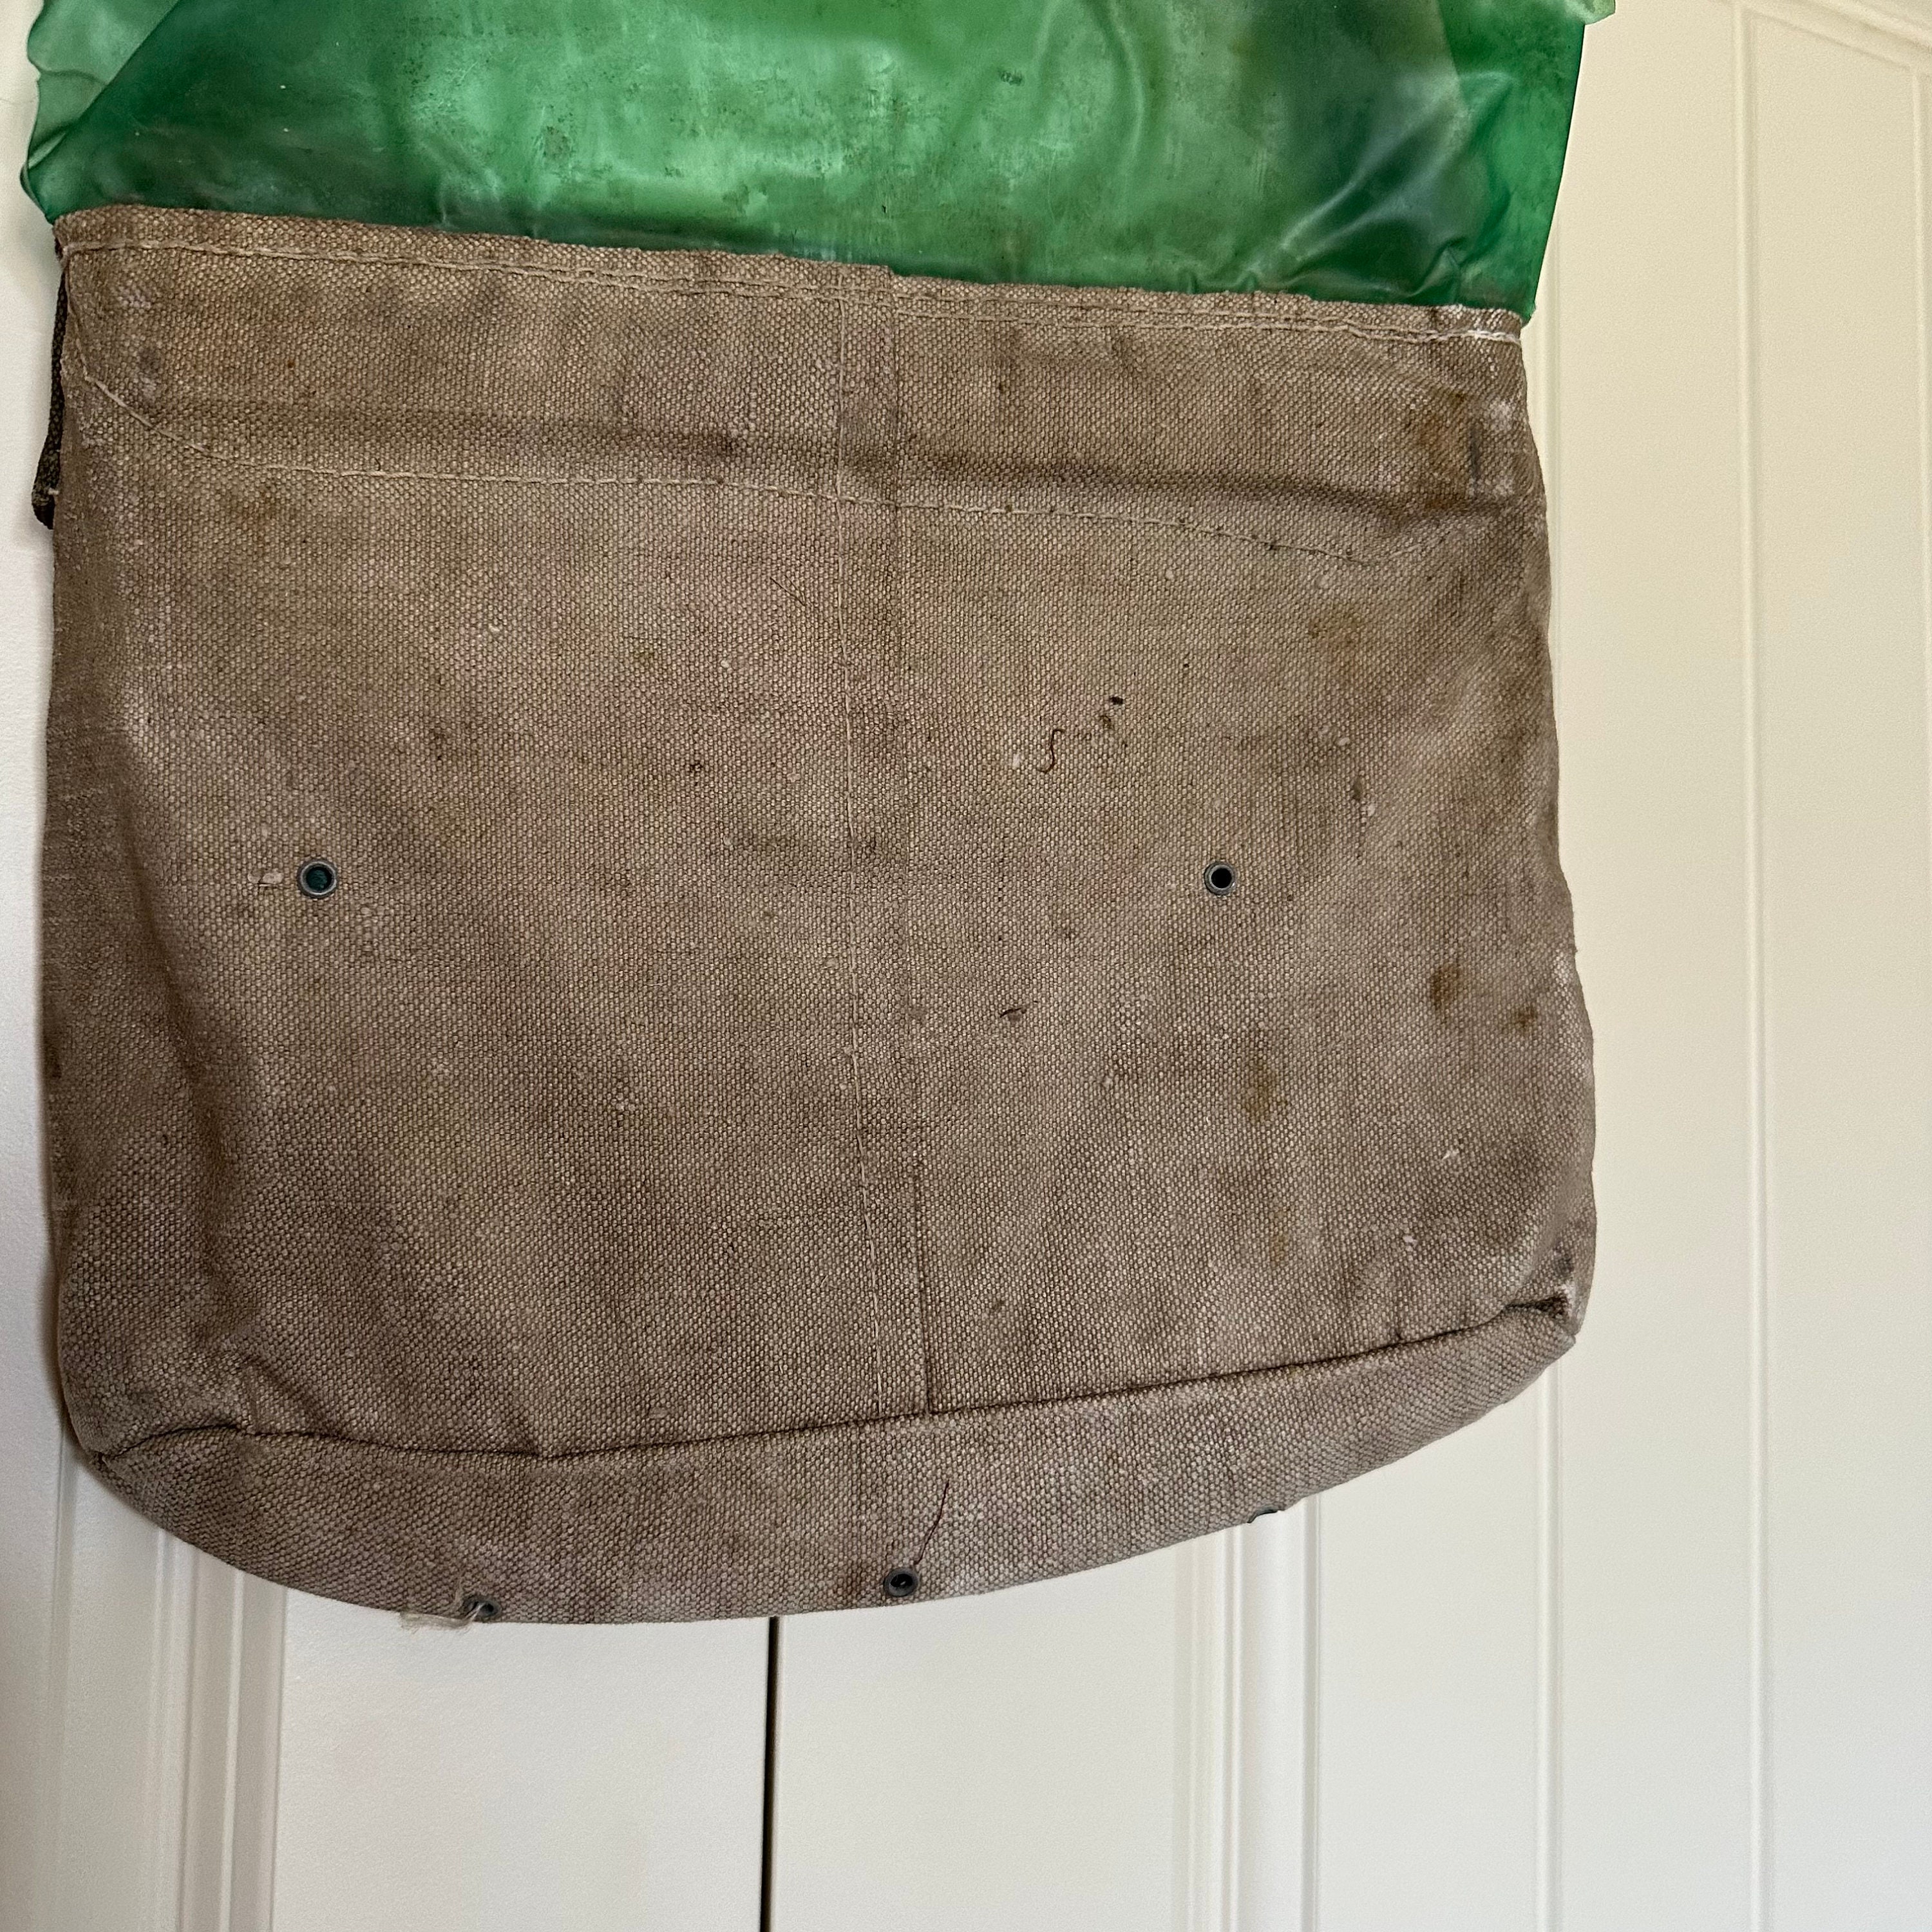 Vintage Fishing Creel, Arctic Creel, Arcticreel, Flax Linen, Fishing Decor,  Fathers Day Gift Basket, Gift Box, Olive Green Adjustable Strap 